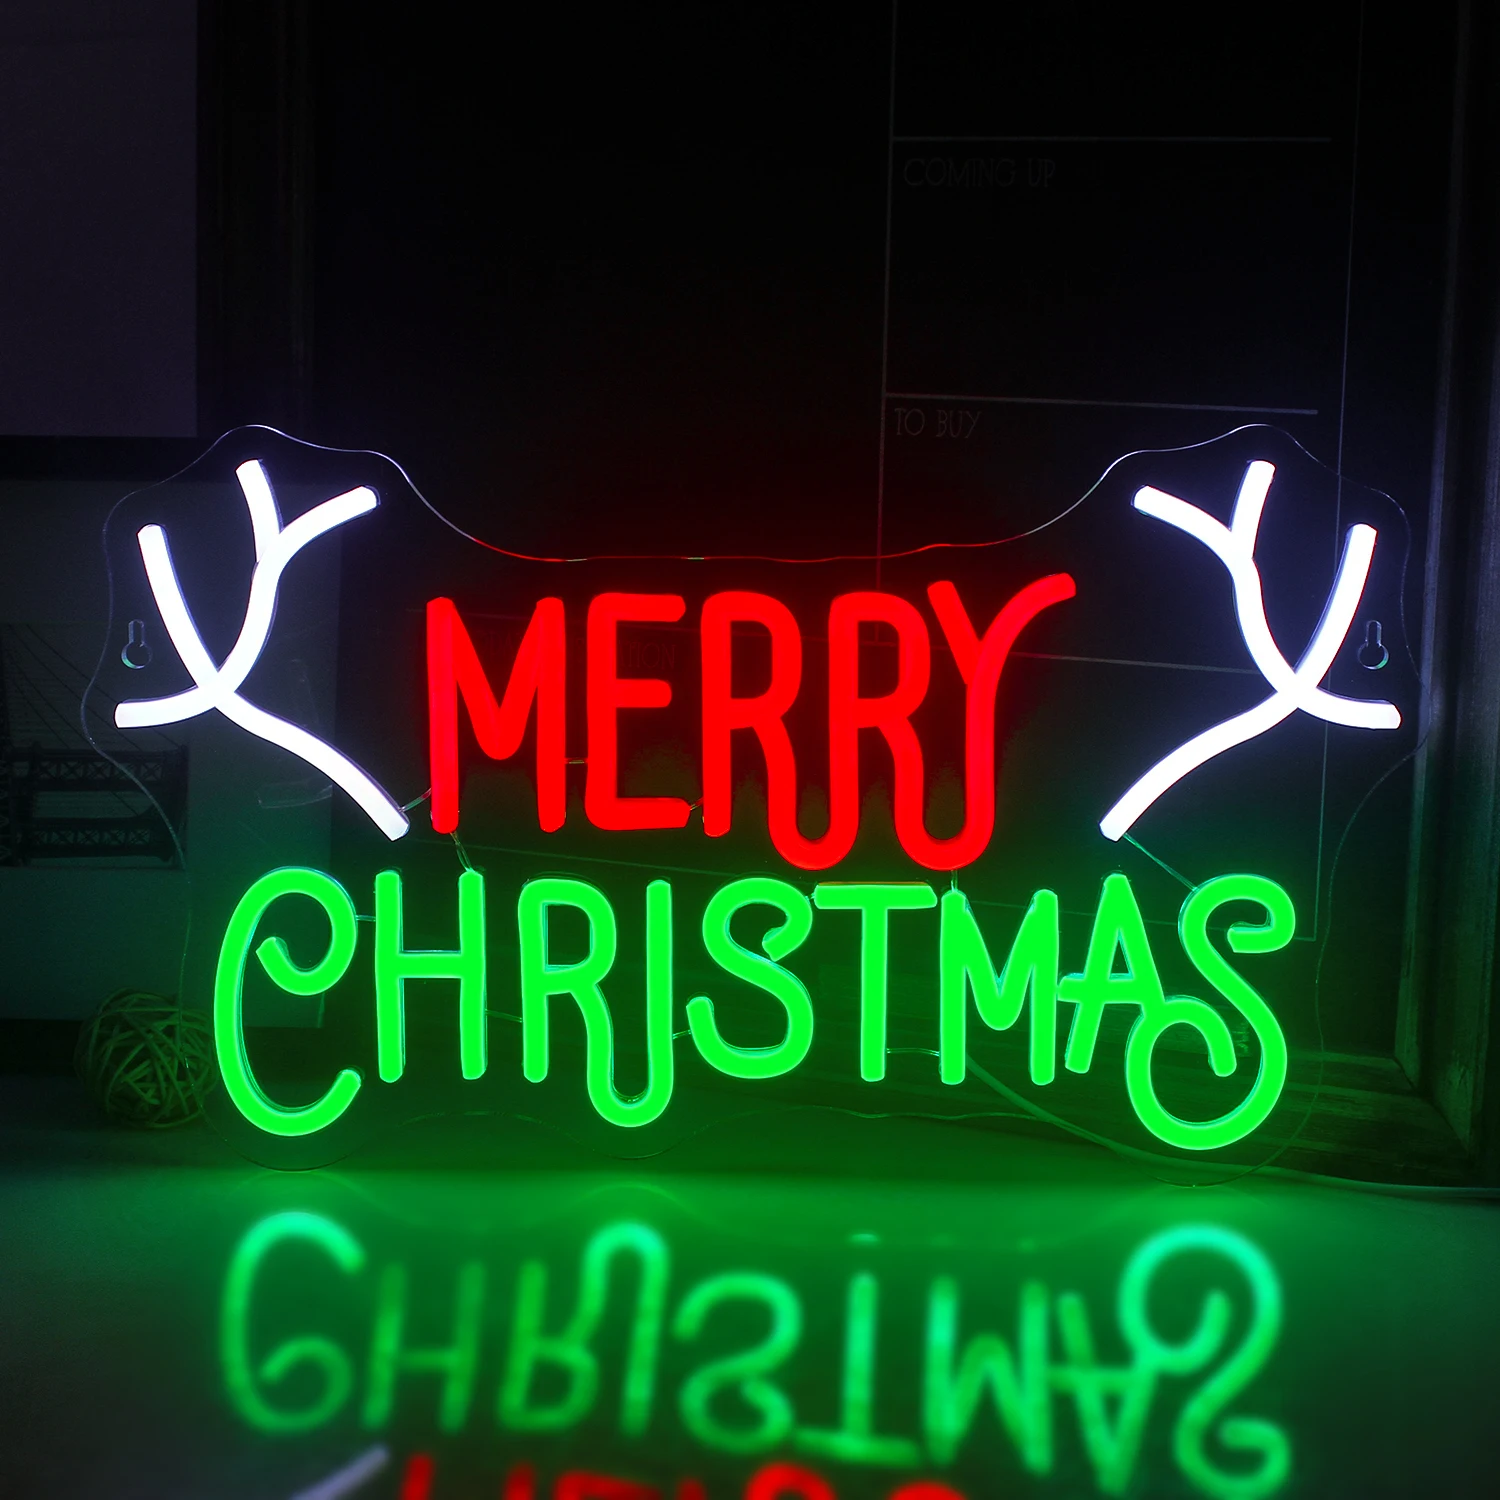 Merry Christmas Neon Sign Led Neon Wall Light Acrylic Board for Christmas Party Supplies Bedroom Wedding Bar Pub Club Christmas pop advertising folder boutique supplies price tags name clips yard sale acrylic merchandise sign holder price display holder